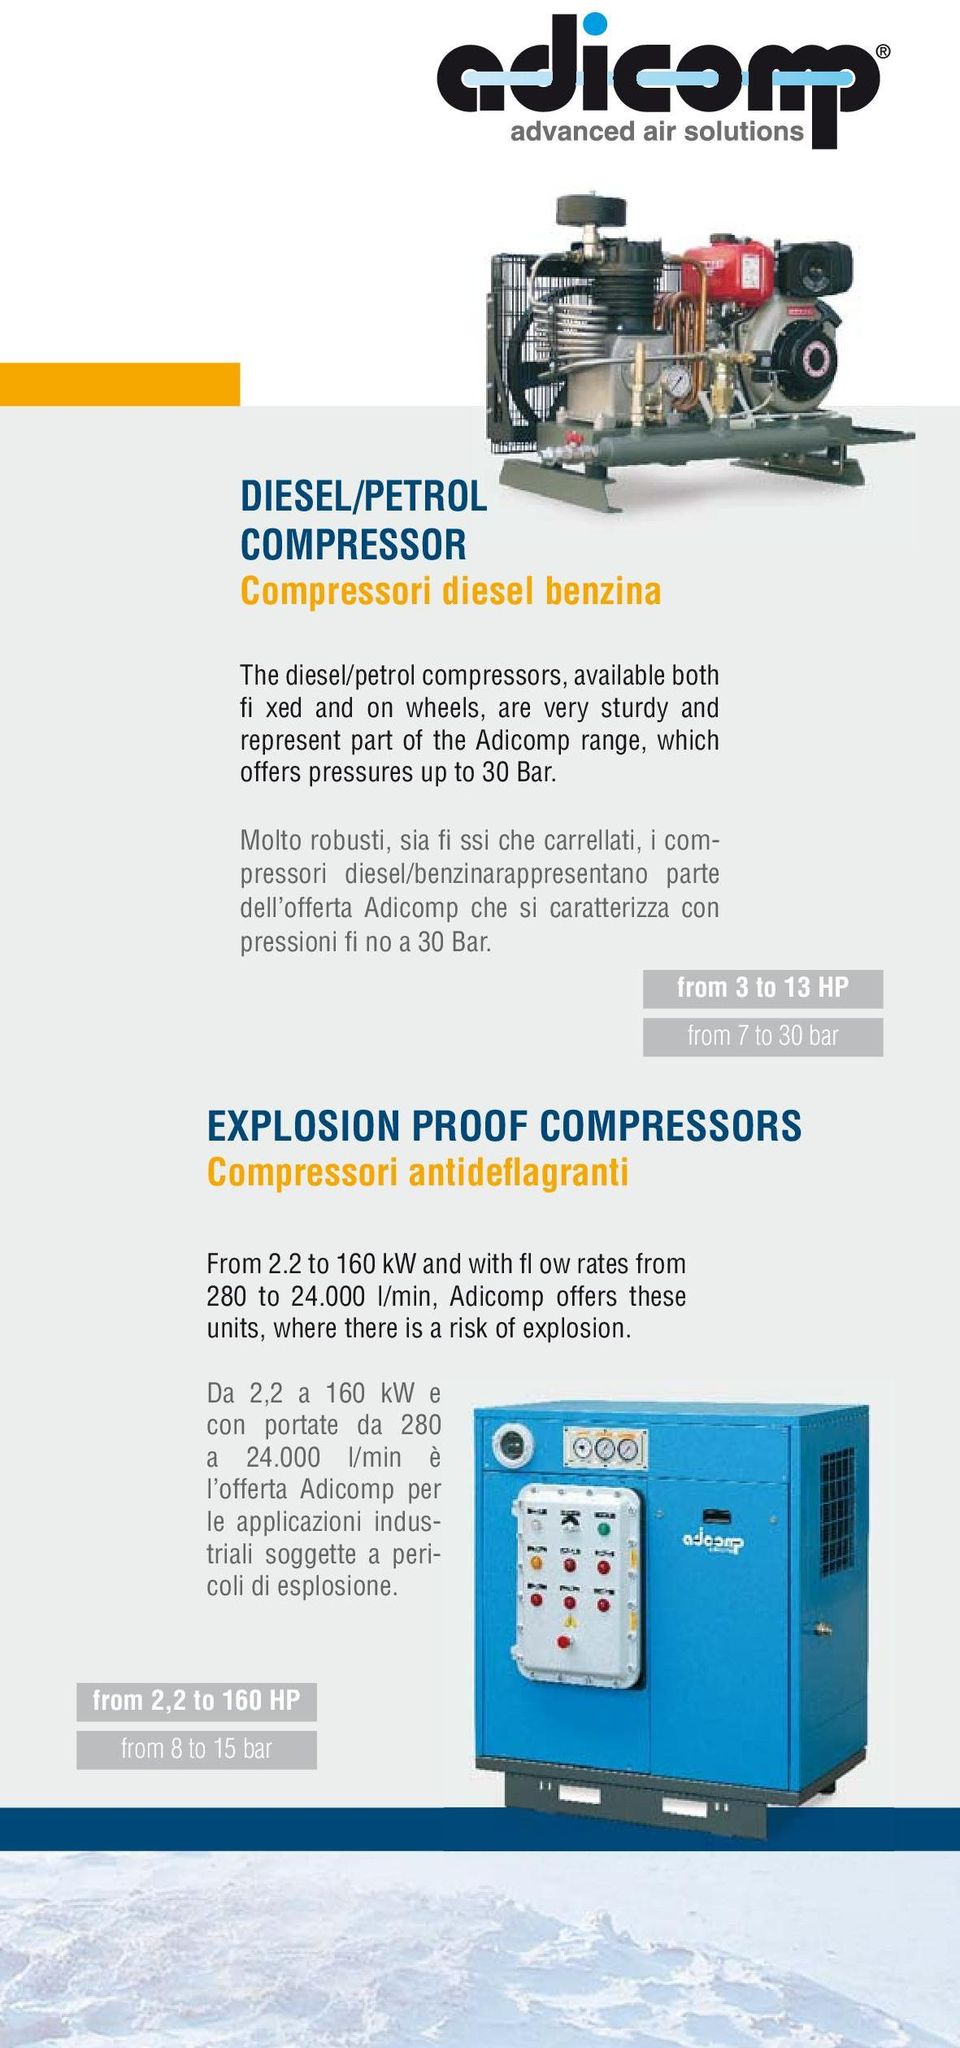 from 3 to 13 HP from 7 to 30 bar EXPLOSION PROOF COMPRESSORS Compressori antidefl agranti From 2.2 to 160 kw and with fl ow rates from 280 to 24.